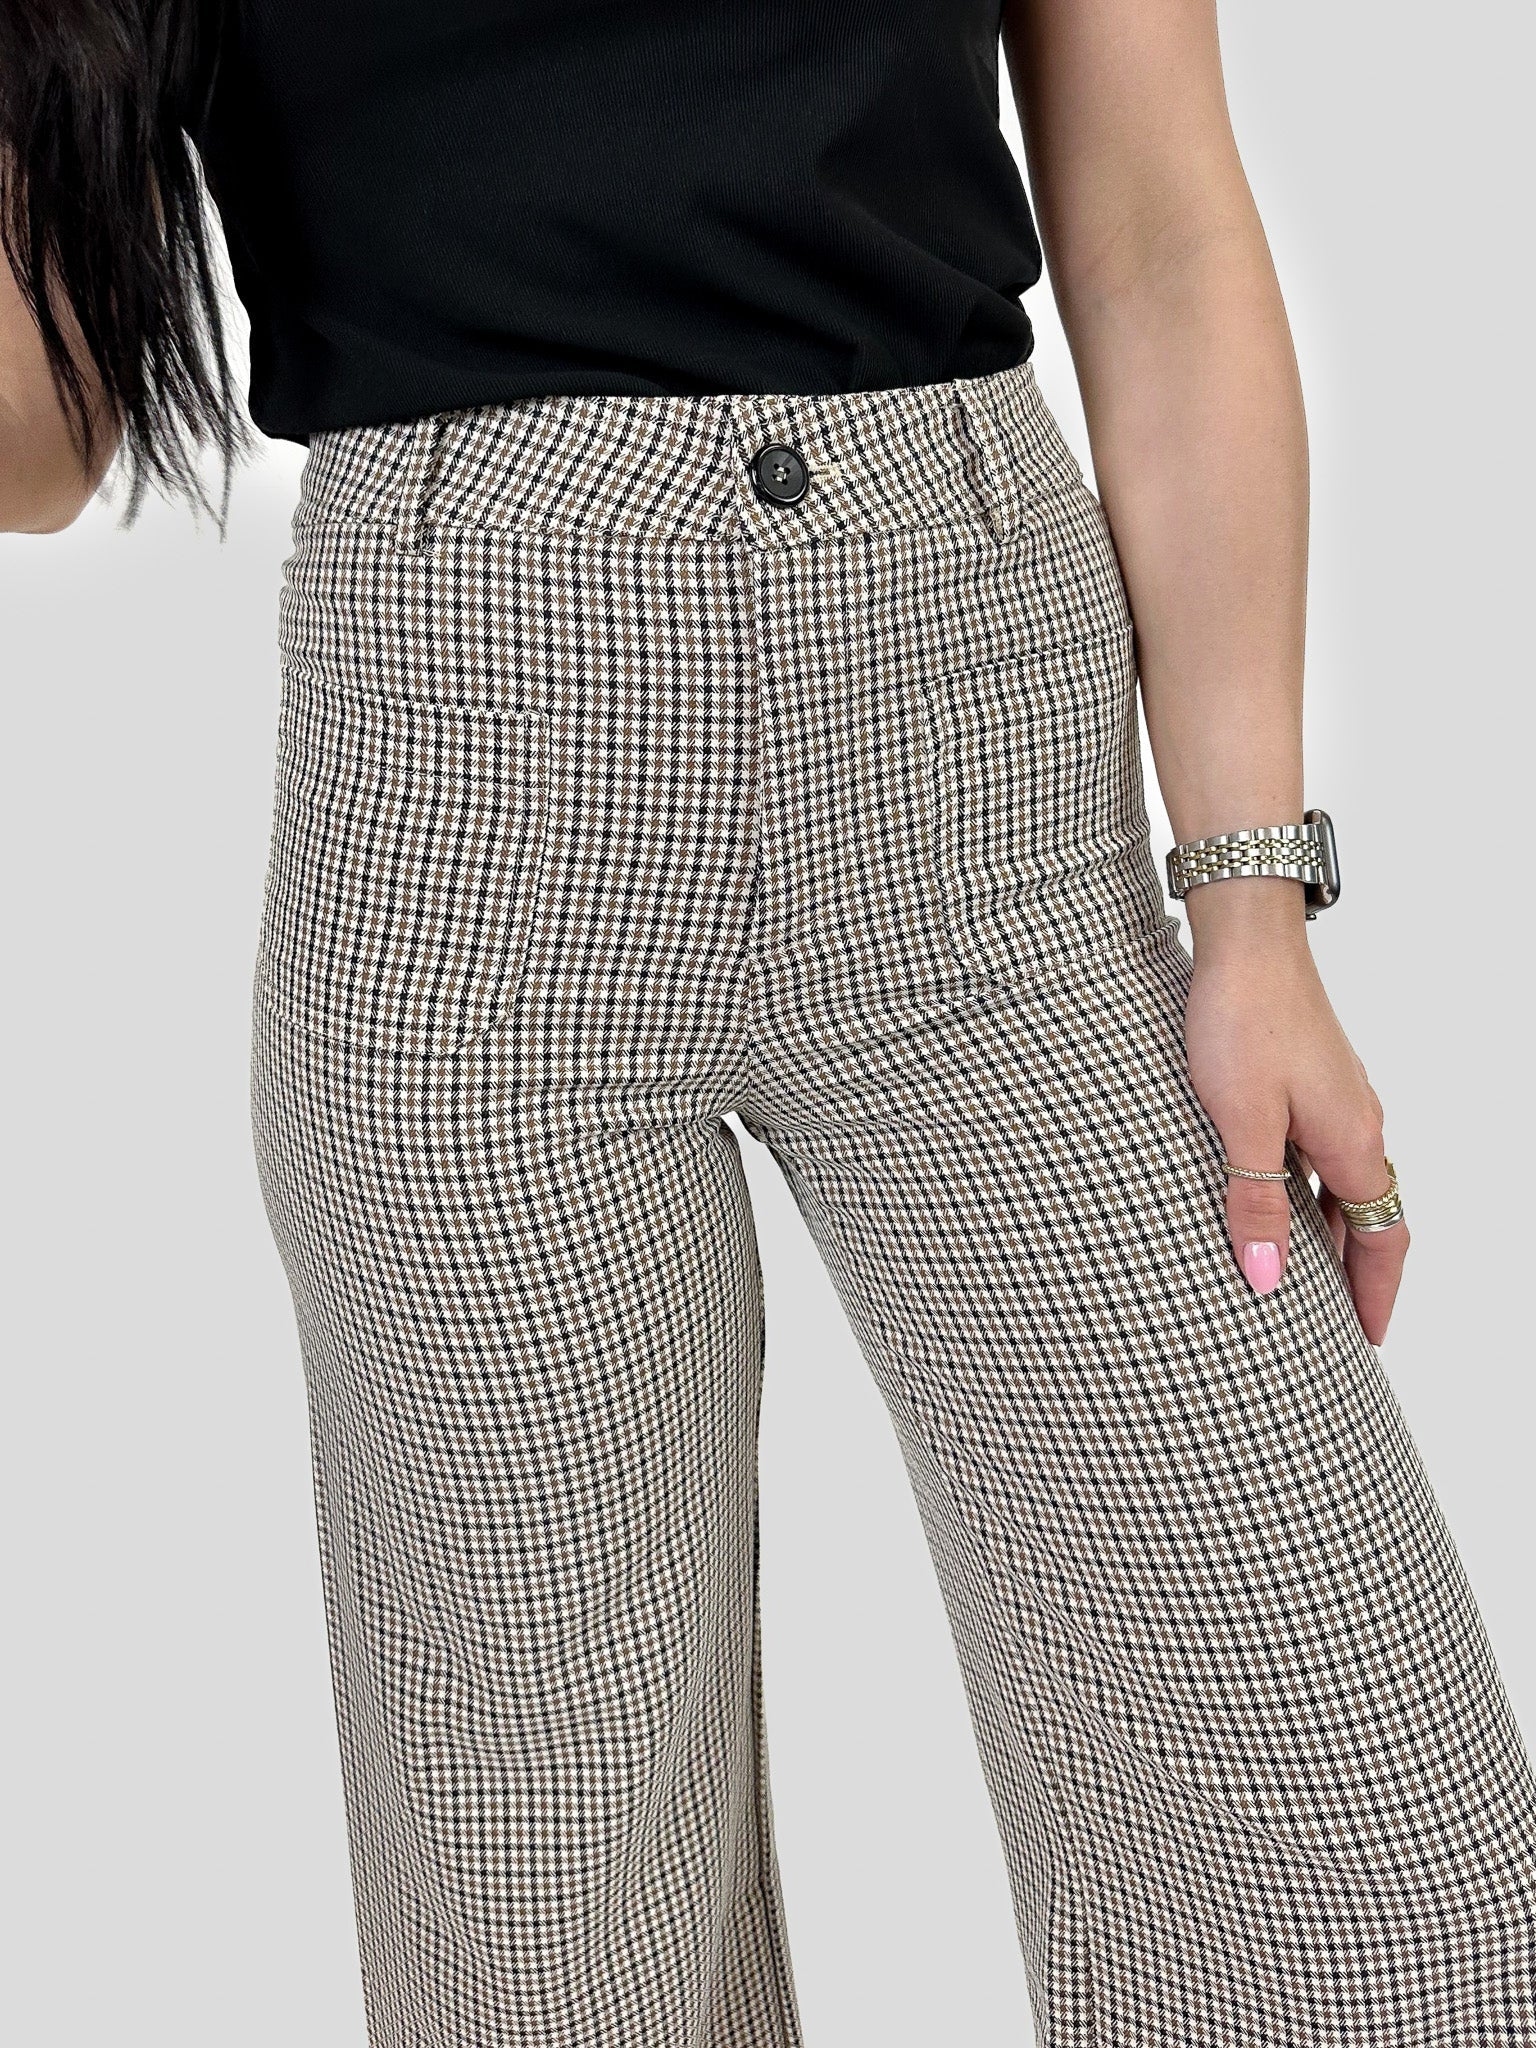 Blakely Stretch Pants